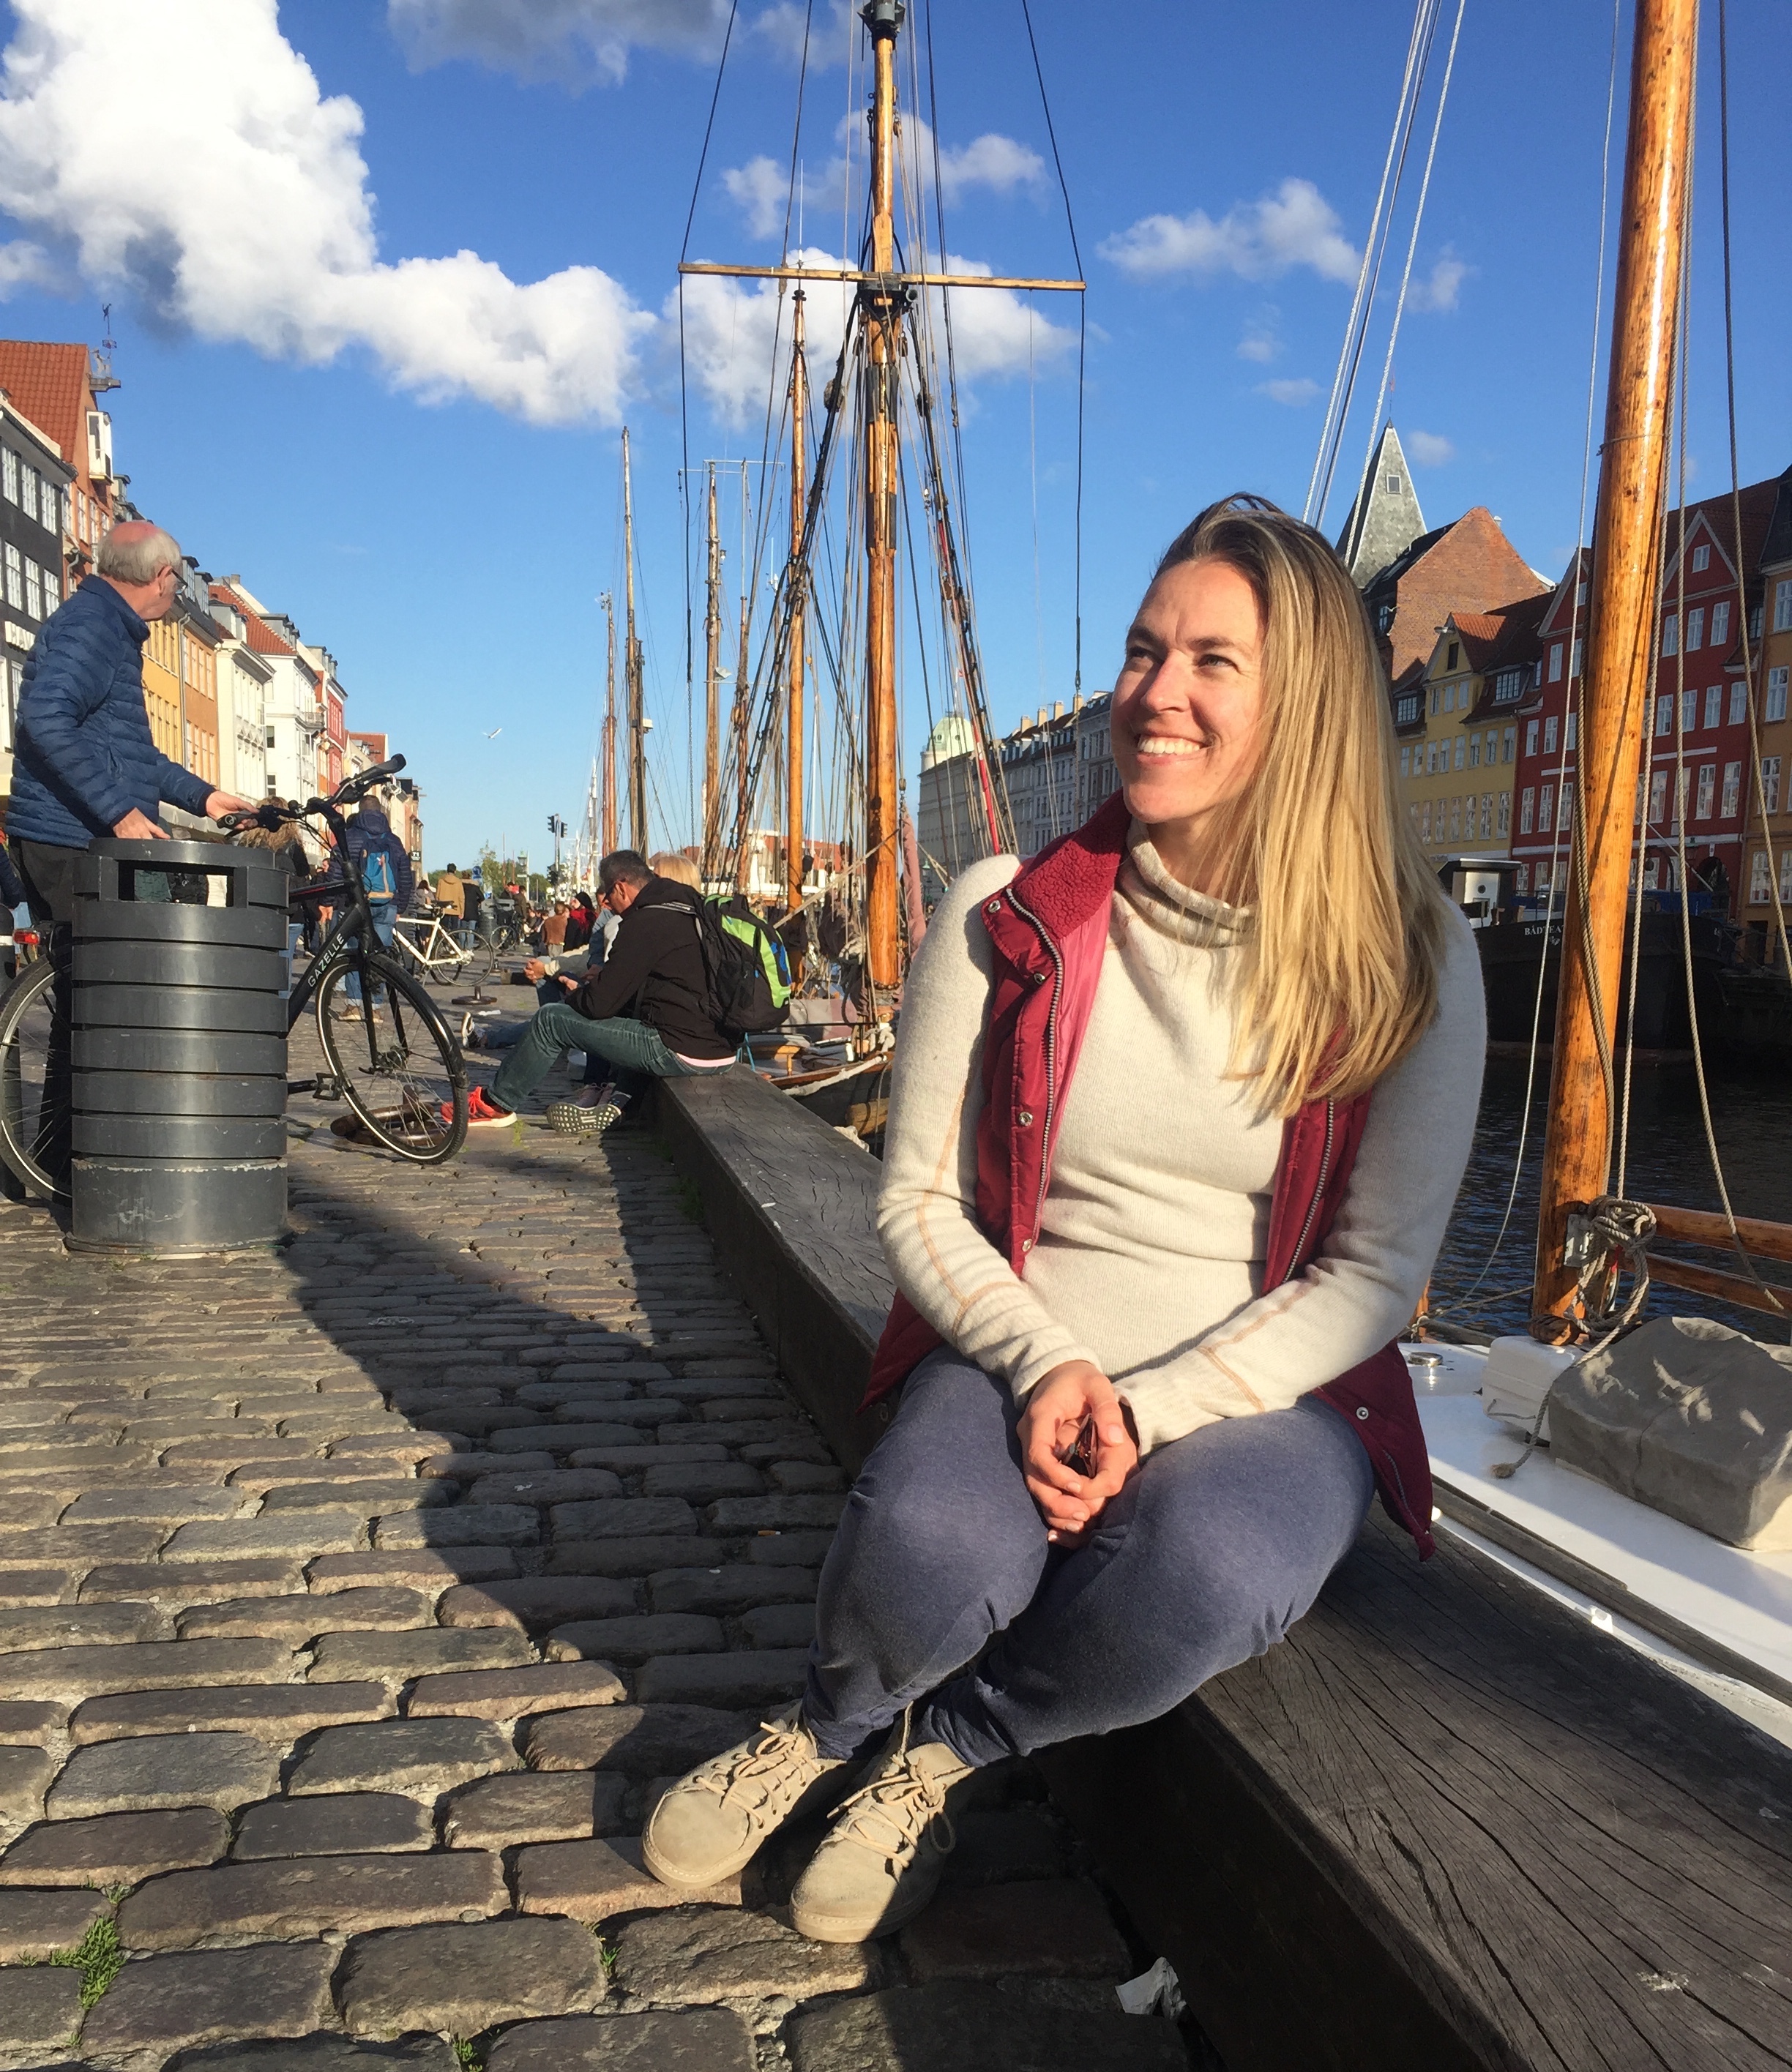 Thanks to Whittier College’s international opportunities, Karen Eisenhut ’08 lives and teaches in Denmark. The college’s Global Poet Scholarship awards $2,000 to every student who studies abroad through the Whittier College Office of International Programs.